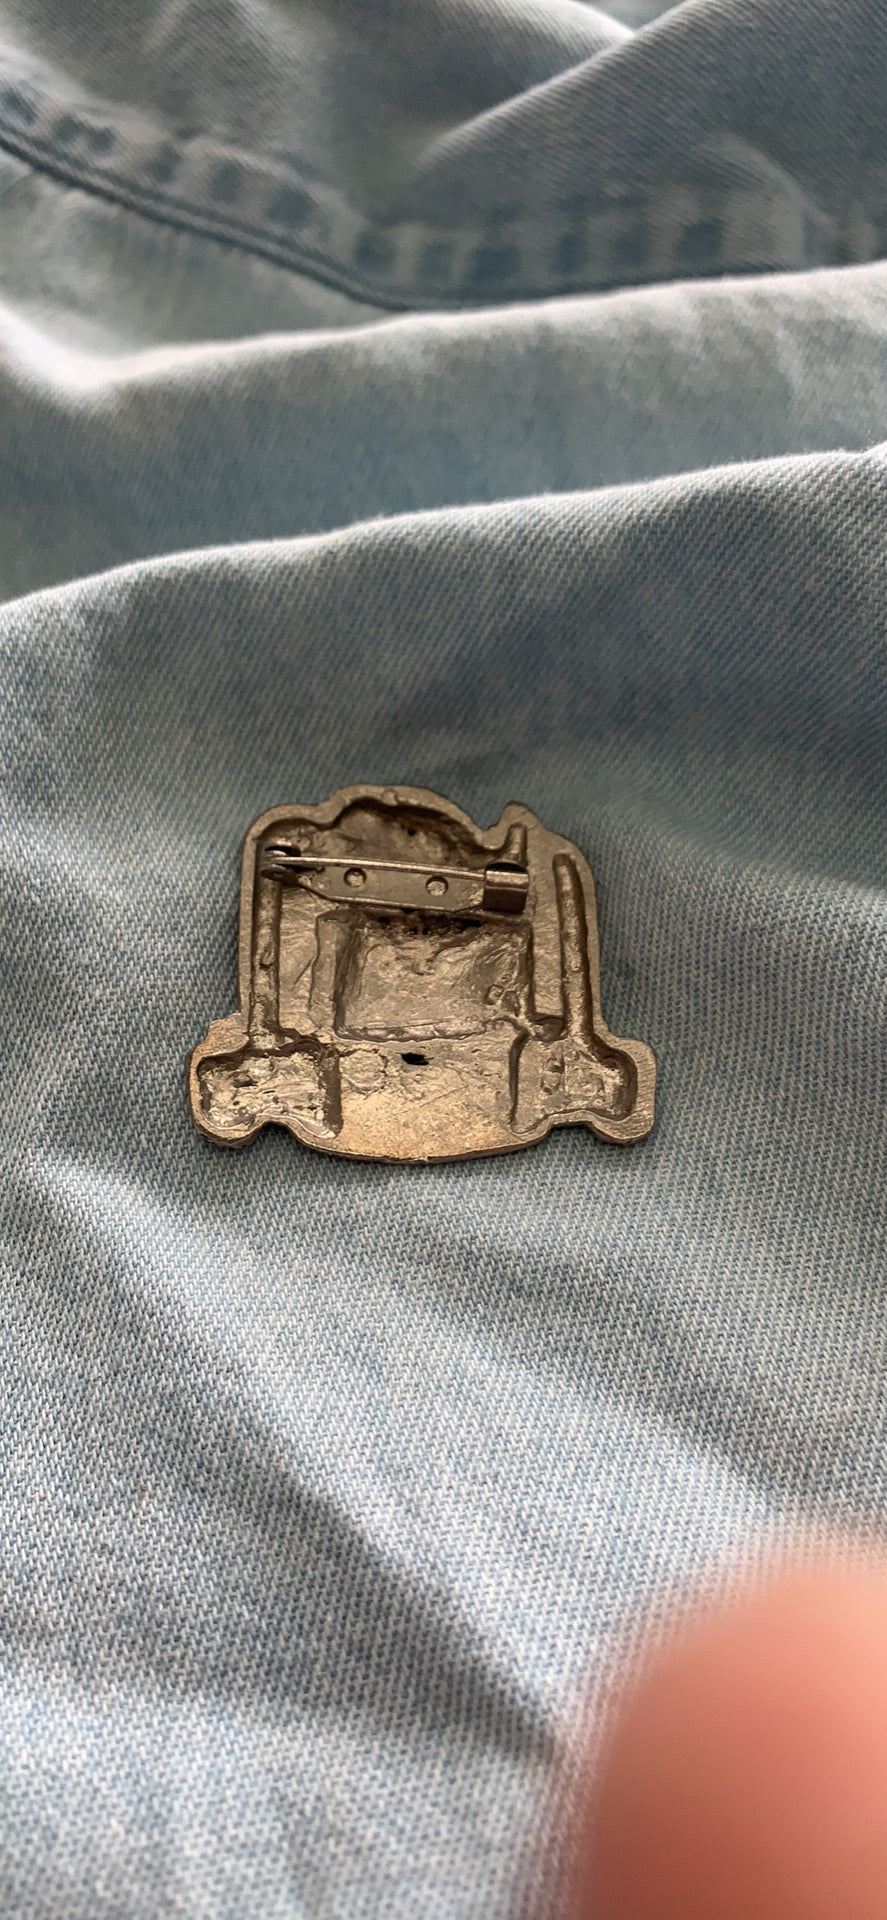 Pin Brooch Made in the U.S.A.